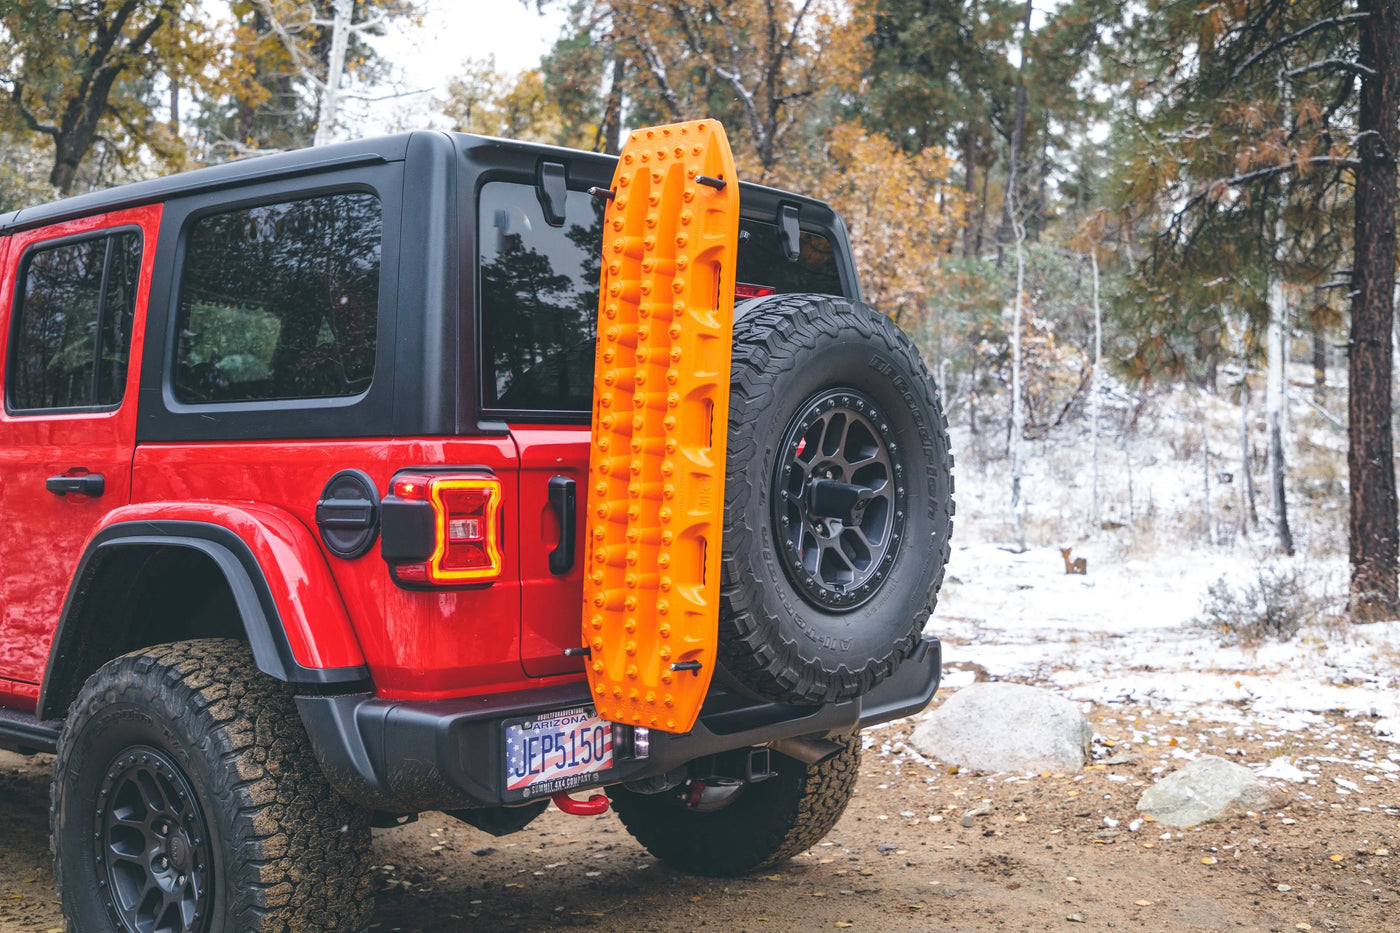 Overland Kitted Spare Tire Accessory Bracket - Wheel Every Weekend